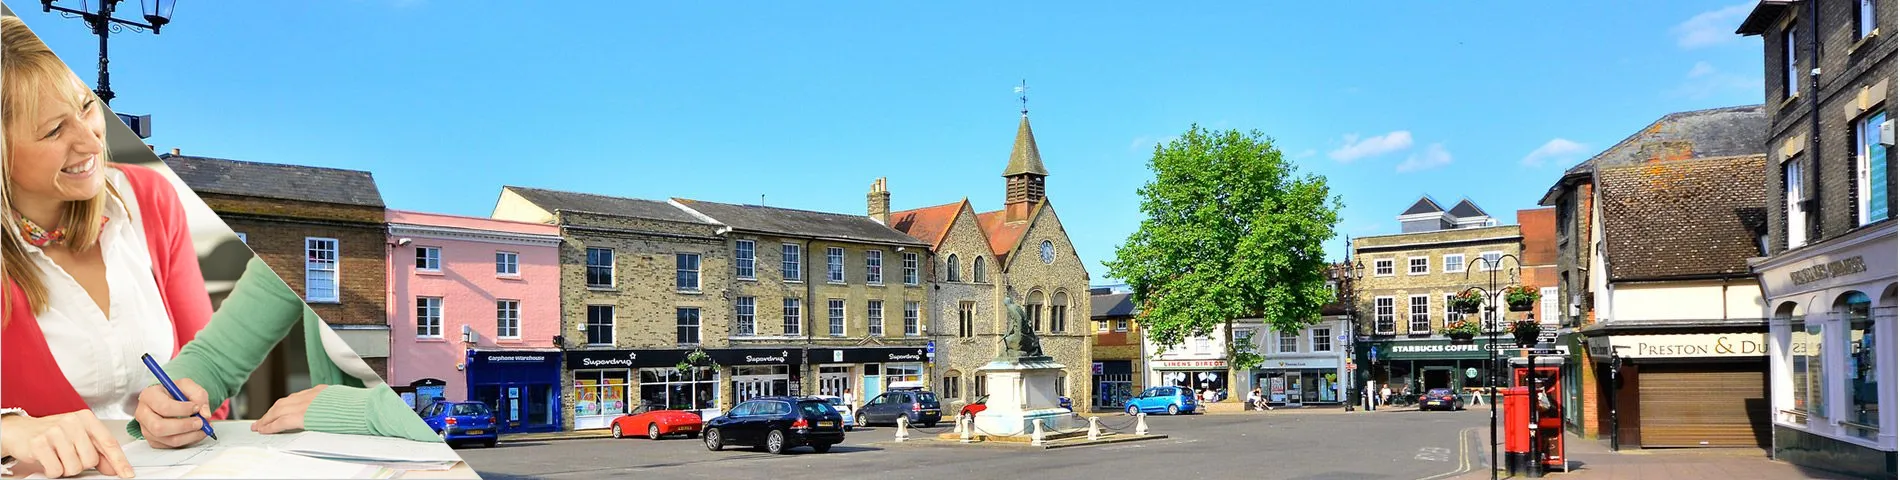 Bury St Edmunds - Study & Live in your Teacher's Home